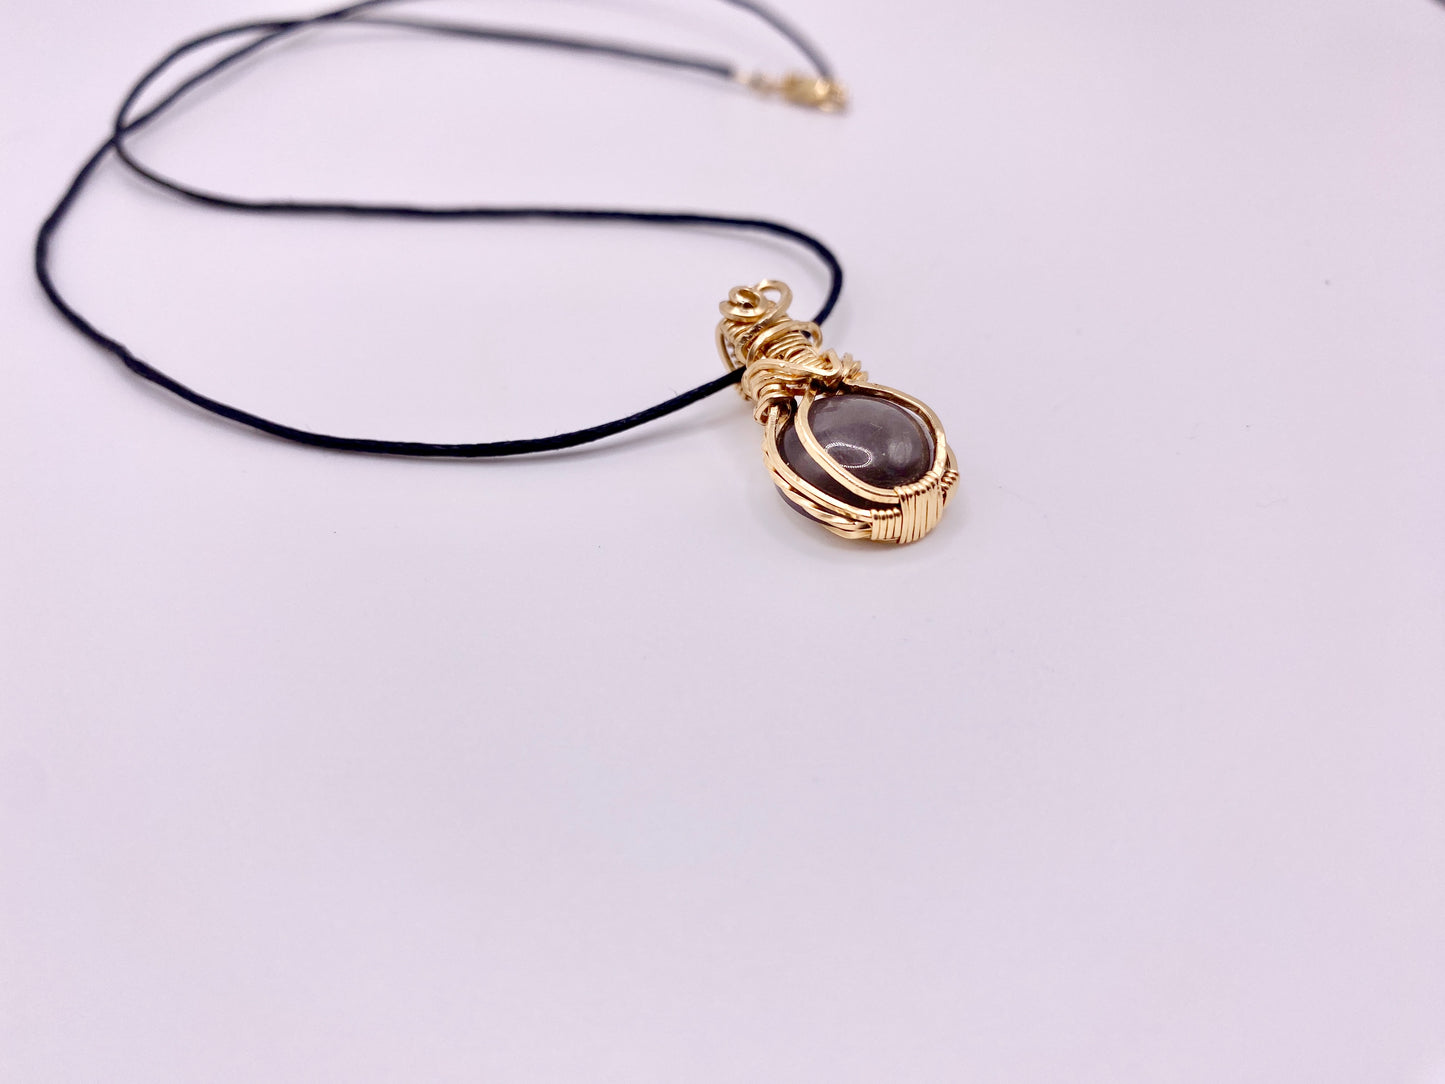 New Moon Wire Wrapped Gray Mini Moonstone Necklace - Original Design in 14K Gold Fill Wire